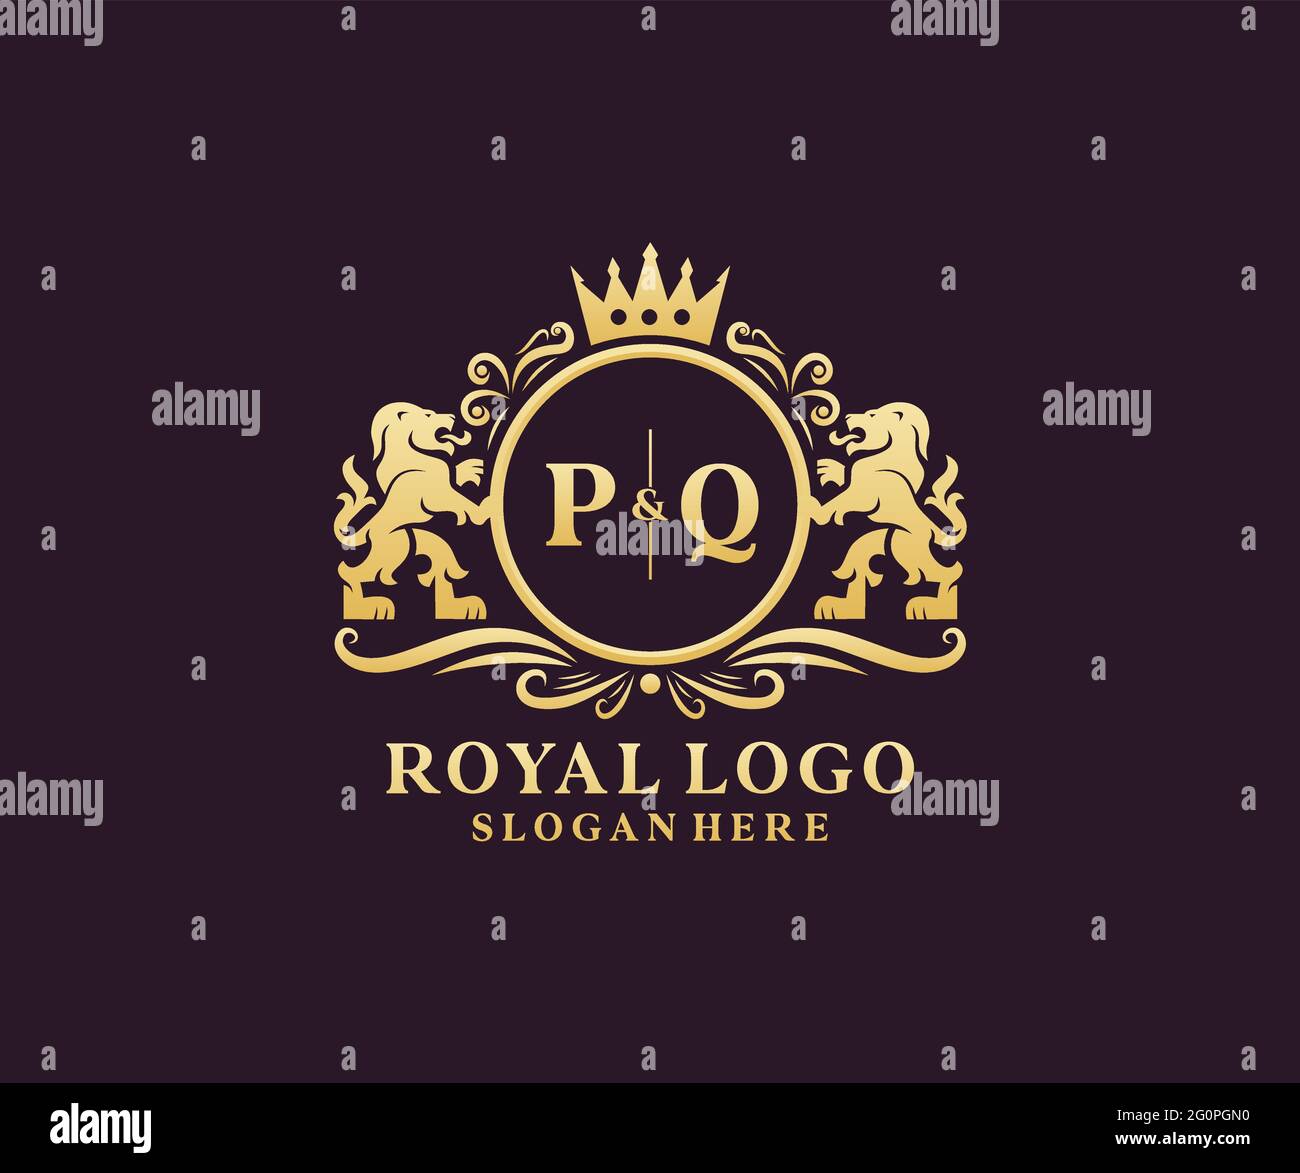 PQ Letter Lion Royal Luxury Logo template in vector art for Restaurant, Royalty, Boutique, Cafe, Hotel, Heraldic, Jewelry, Fashion and other vector il Stock Vector